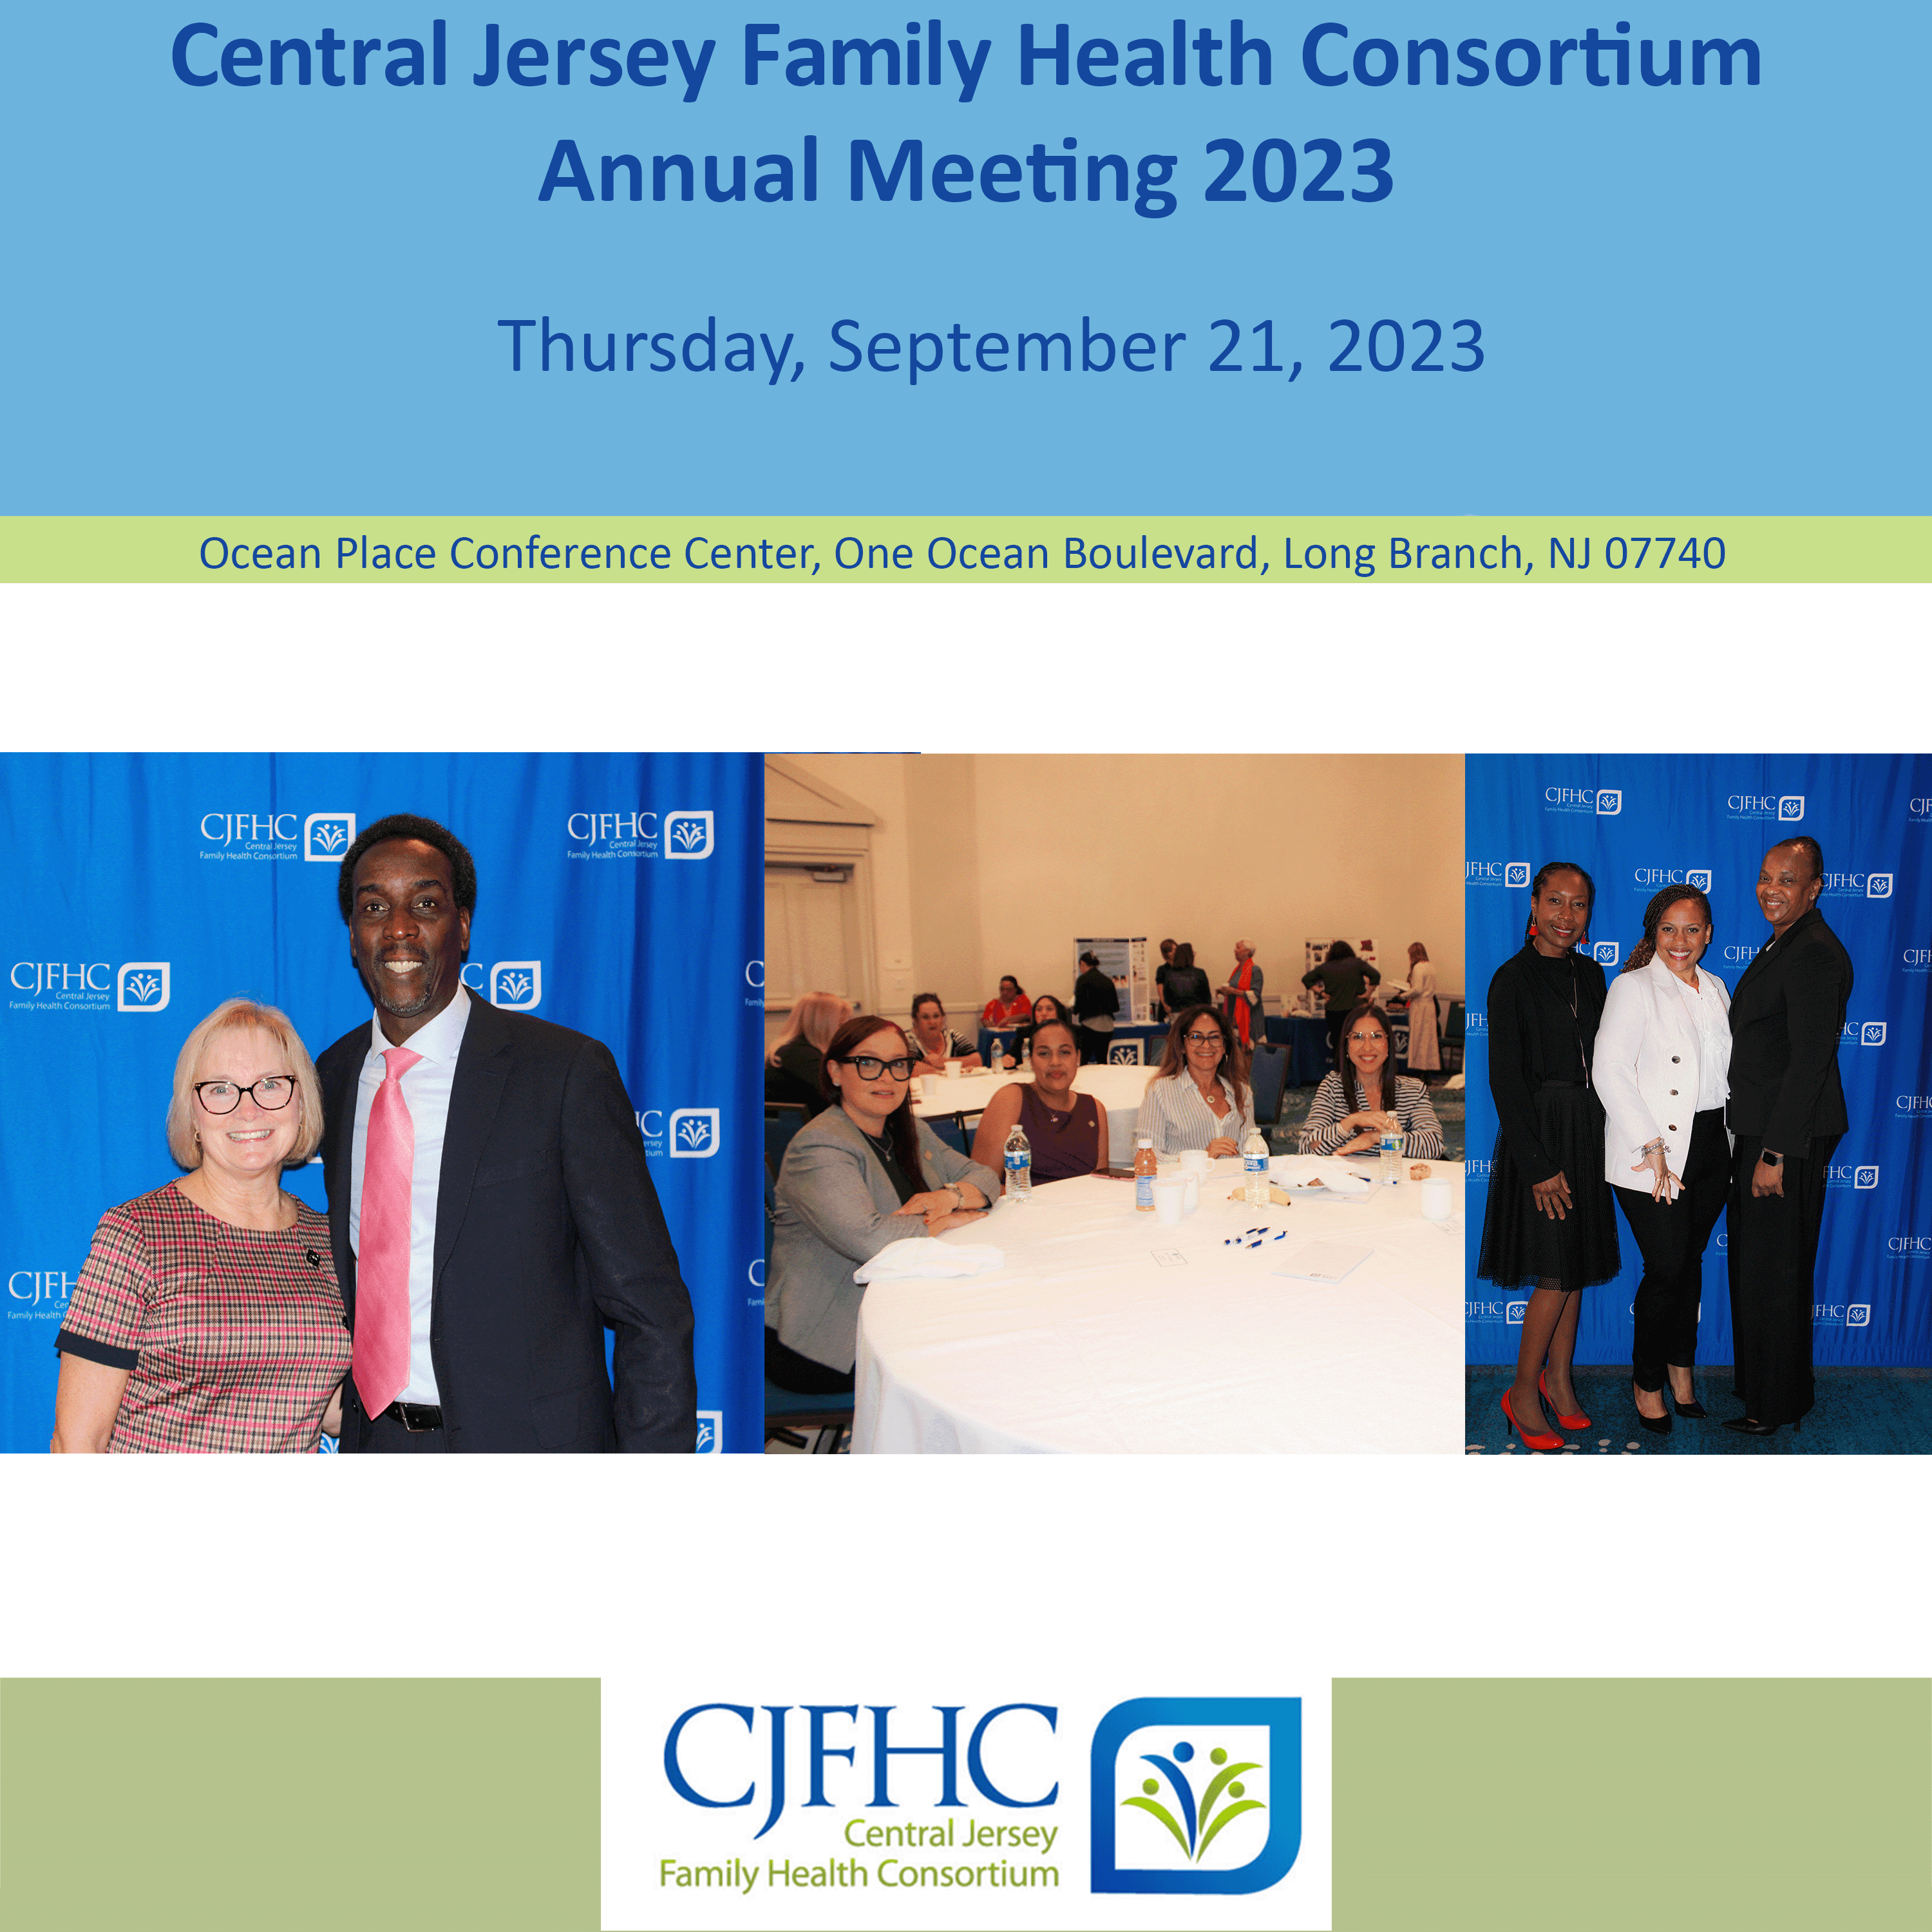 CJFHC Holds Annual Meeting 2023